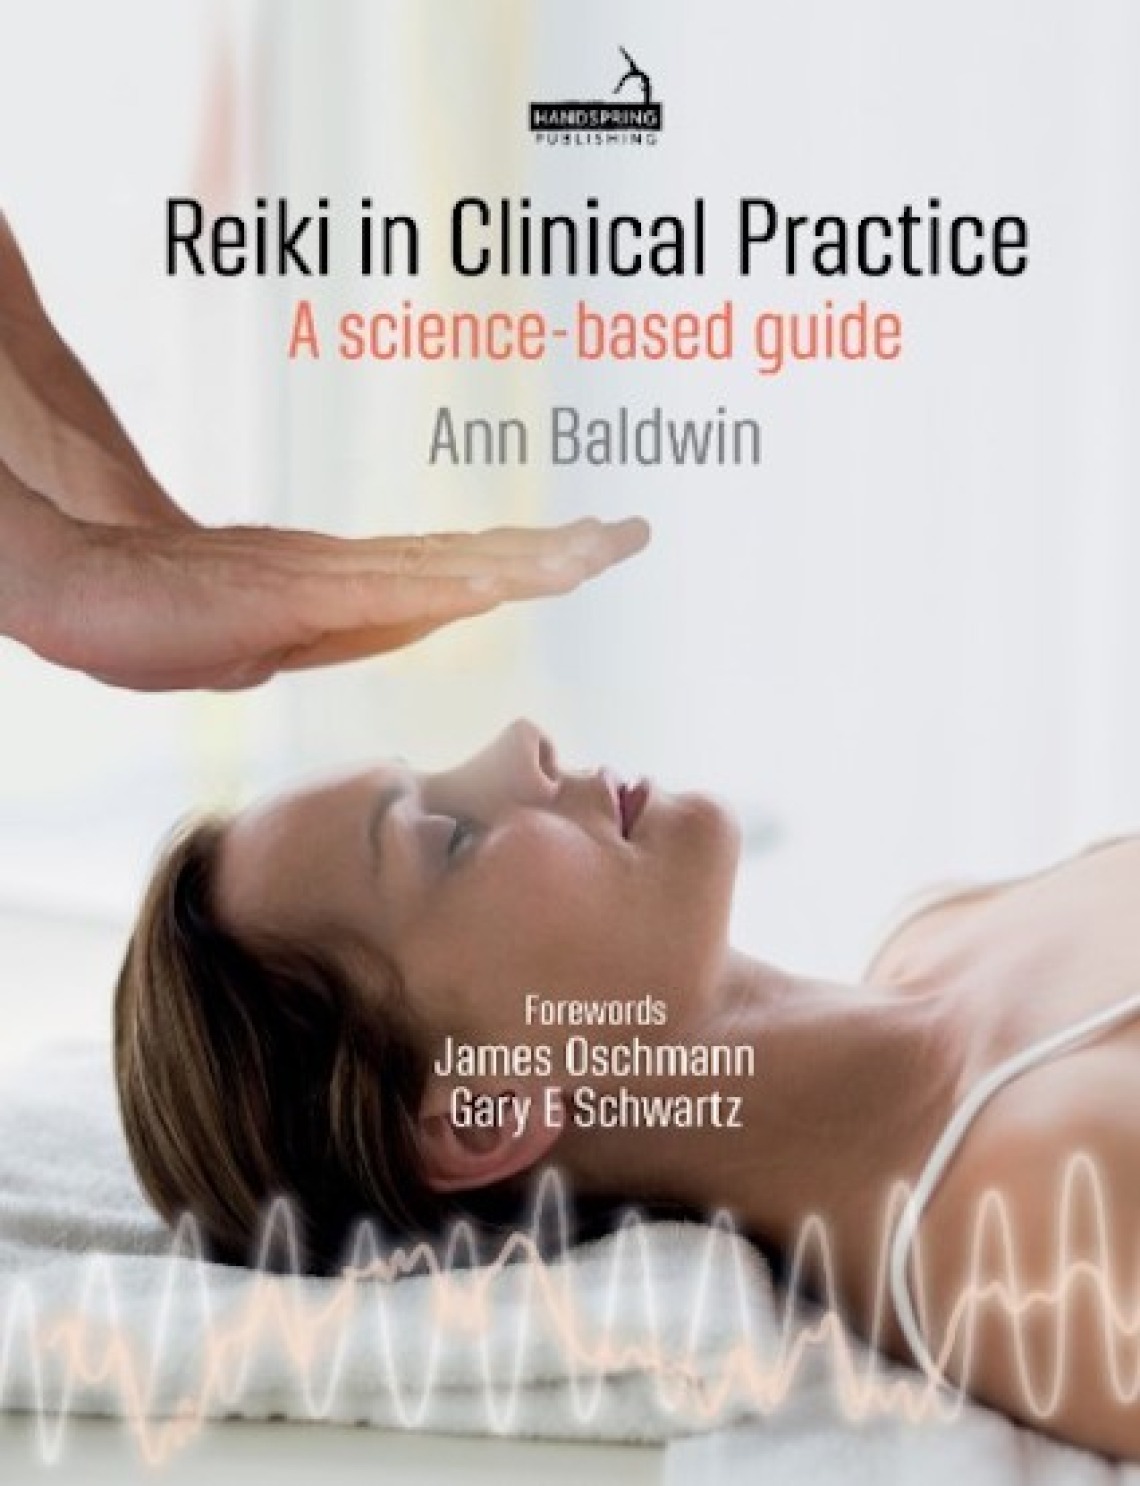 Dr. Ann Baldwin Publishes Book on Reiki in Clinical Practice